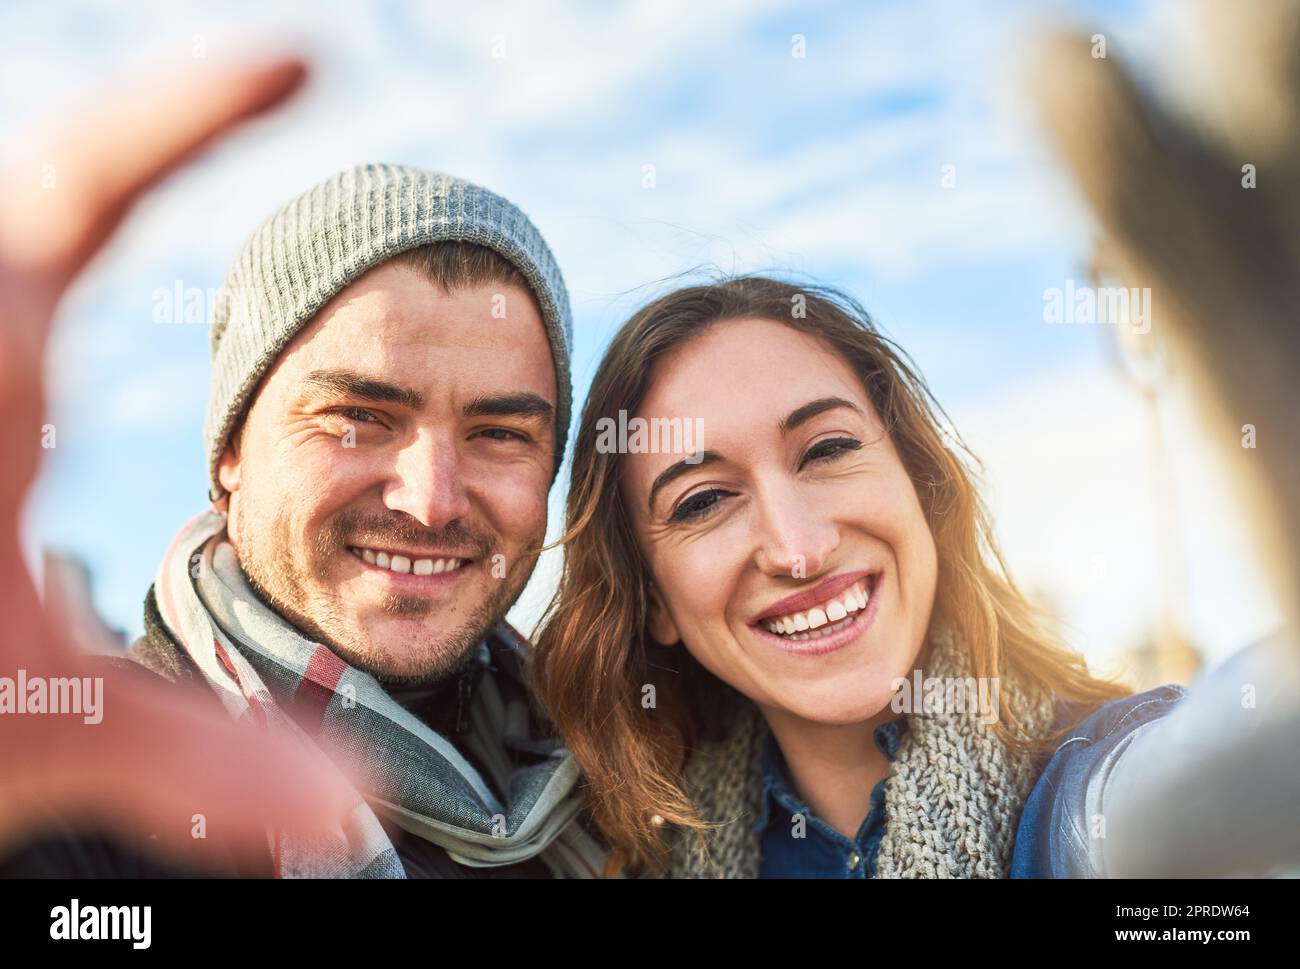 We are just perfect for each other. an affectionate young couple enjoying their foreign getaway. Stock Photo